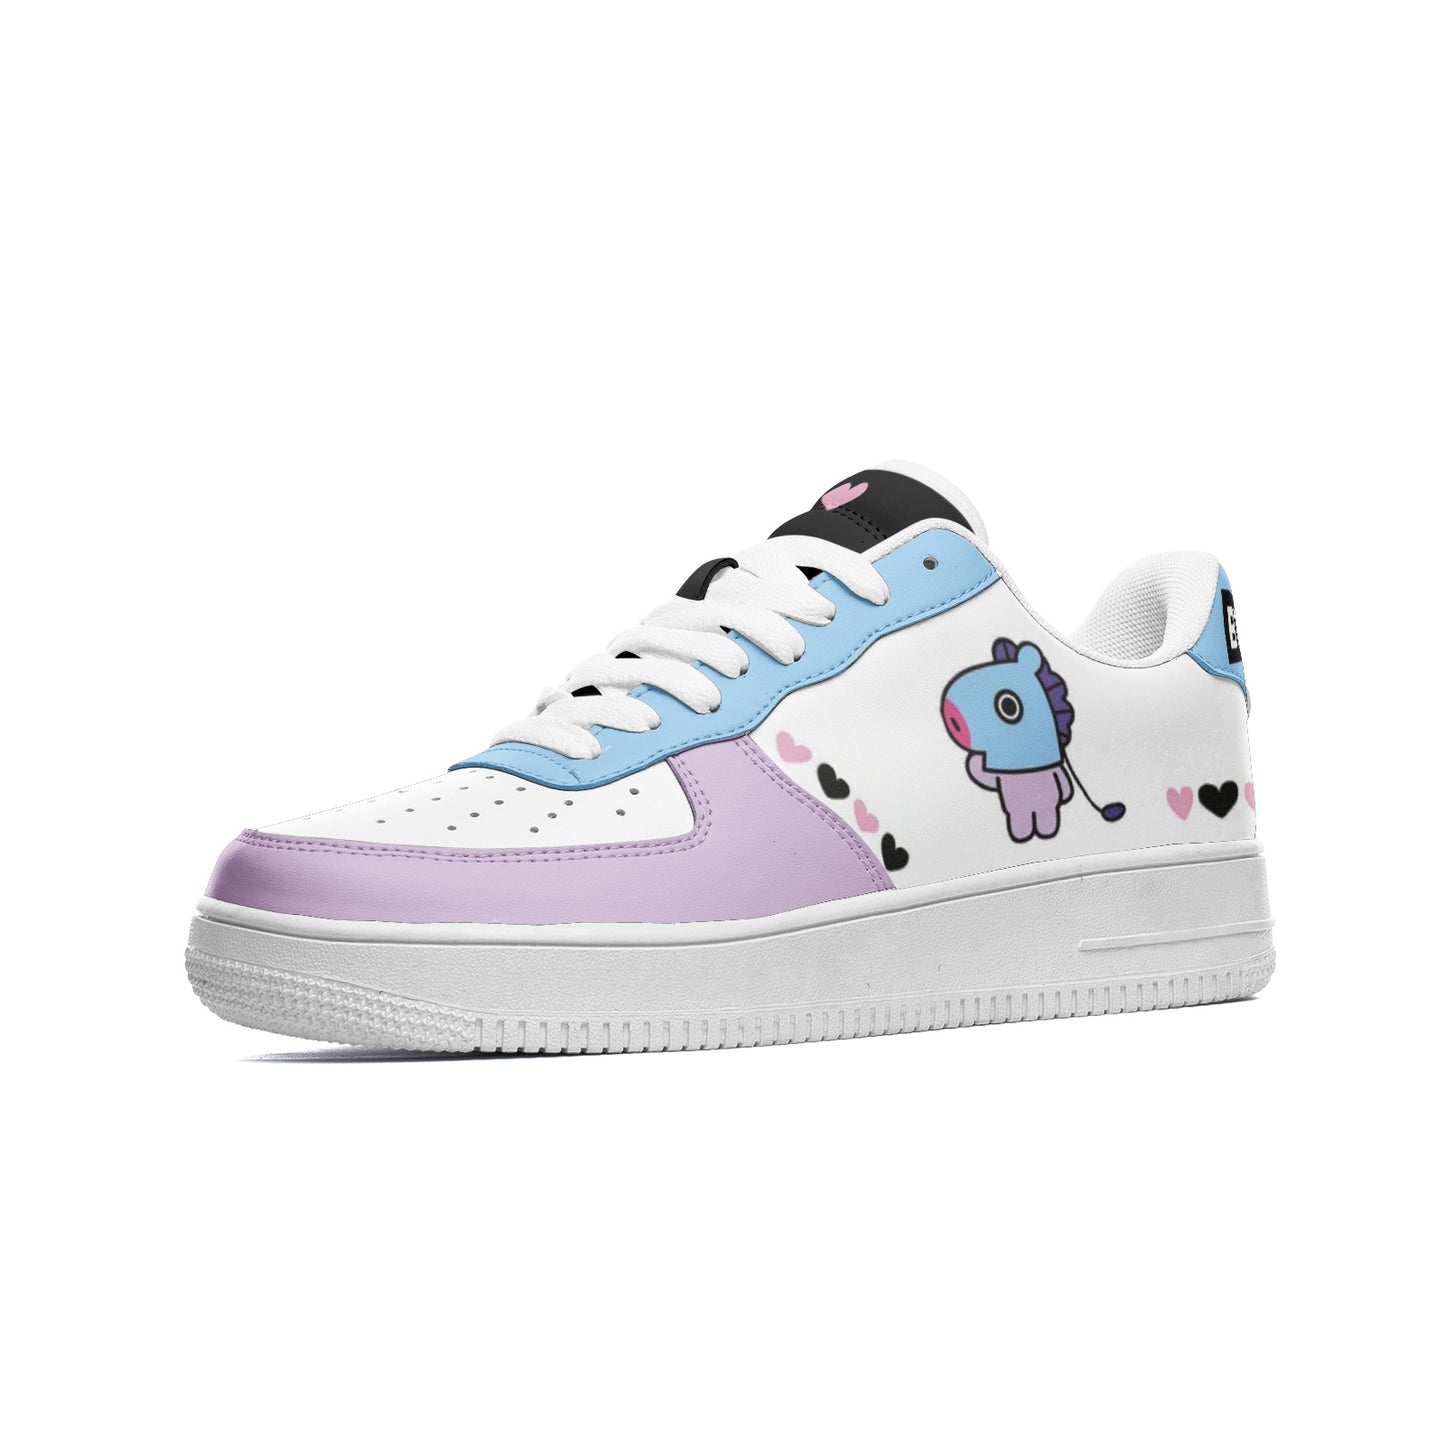 BT21 Mang Unisex Low Top Leather Sneakers